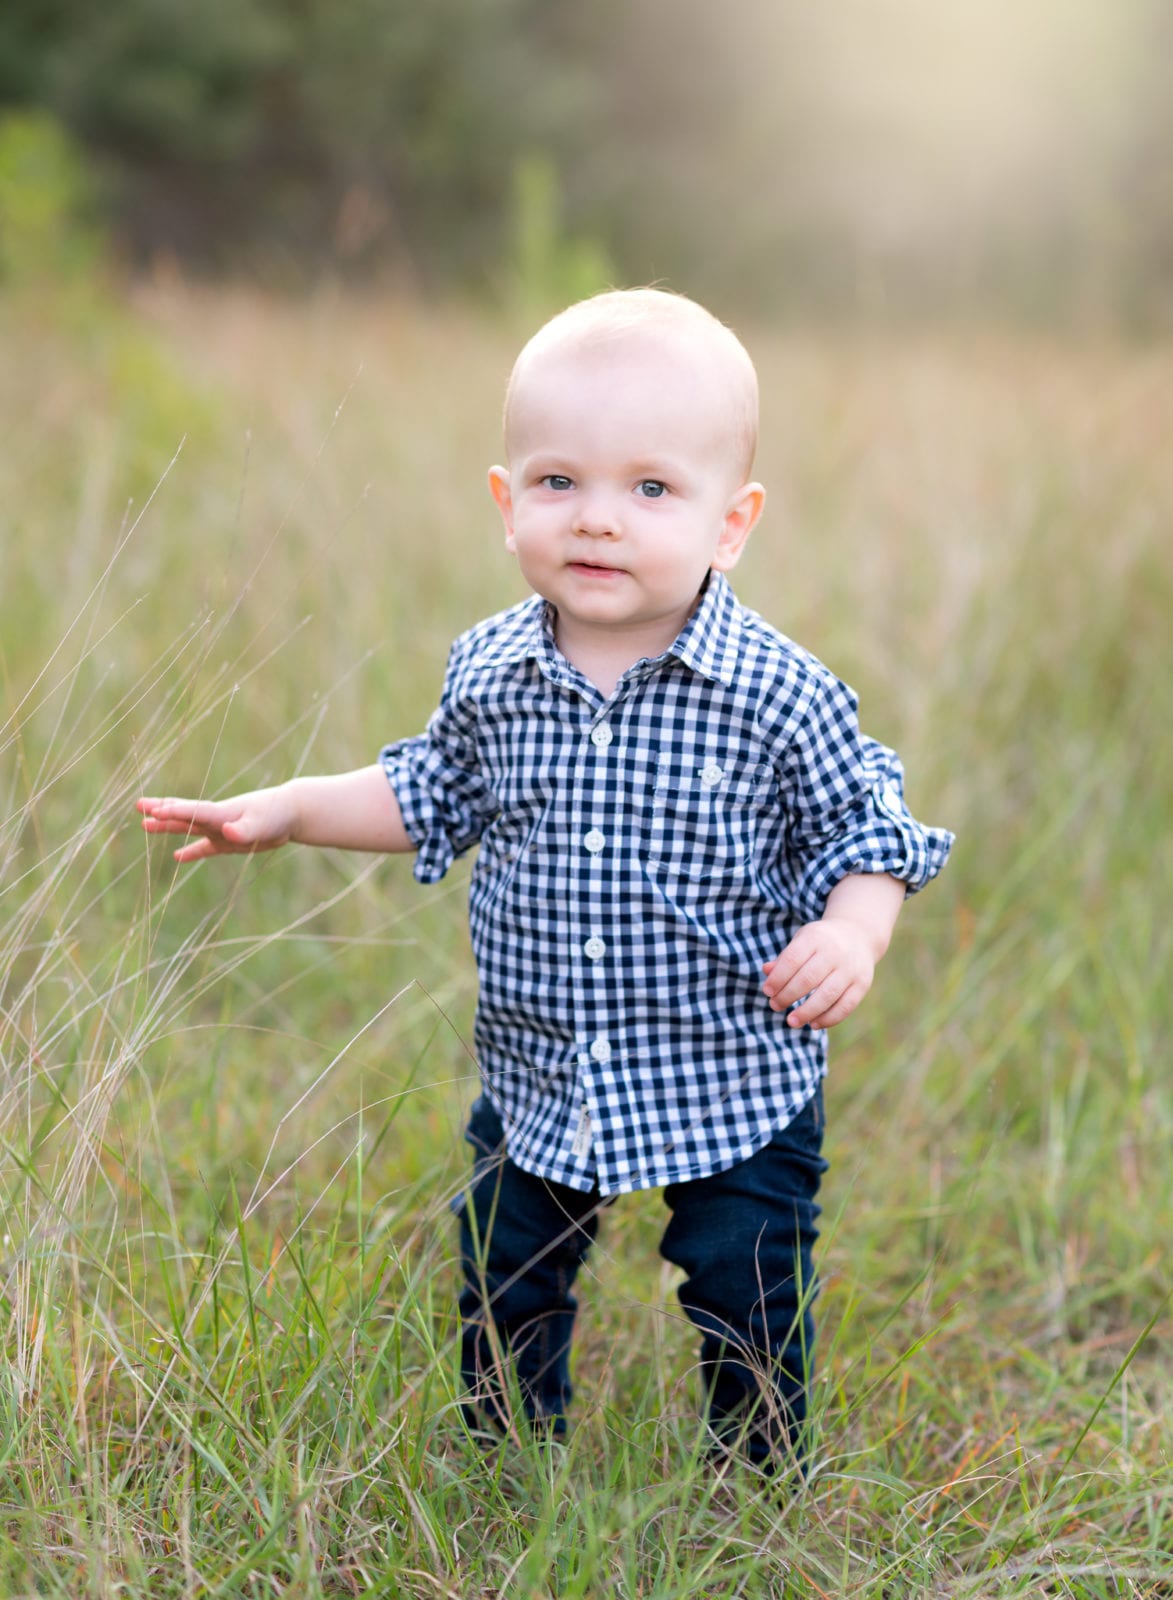 1 year old boy walking in the grass